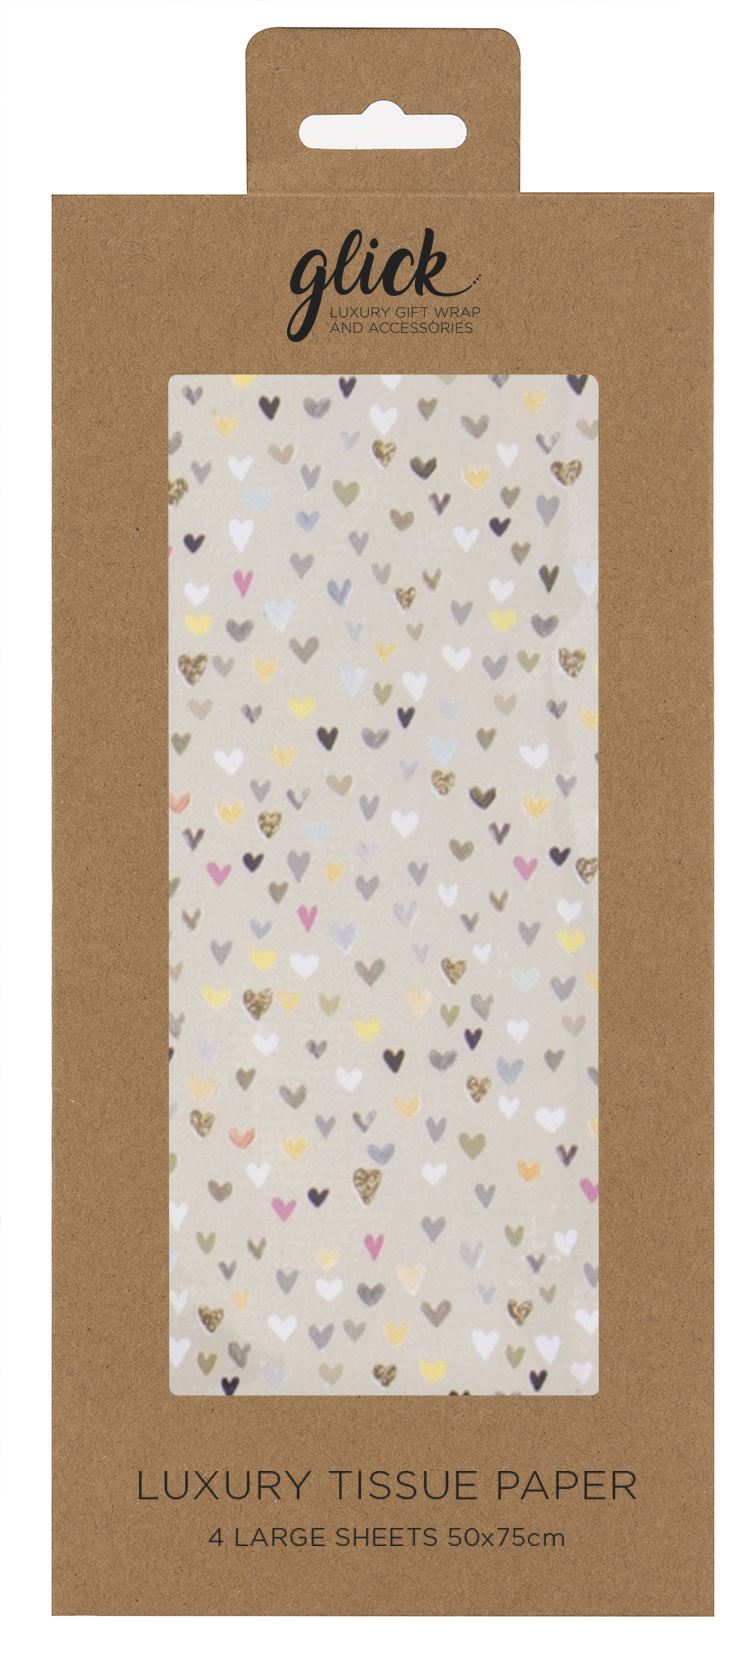 Retail packaging for A rectangular sheet of tissue paper with a matt gold/beige background covered in tiny hearts of differing colours and textures. The hearts are pink, gold, black, white and silver. The hearts are not uniform in shape or placement.